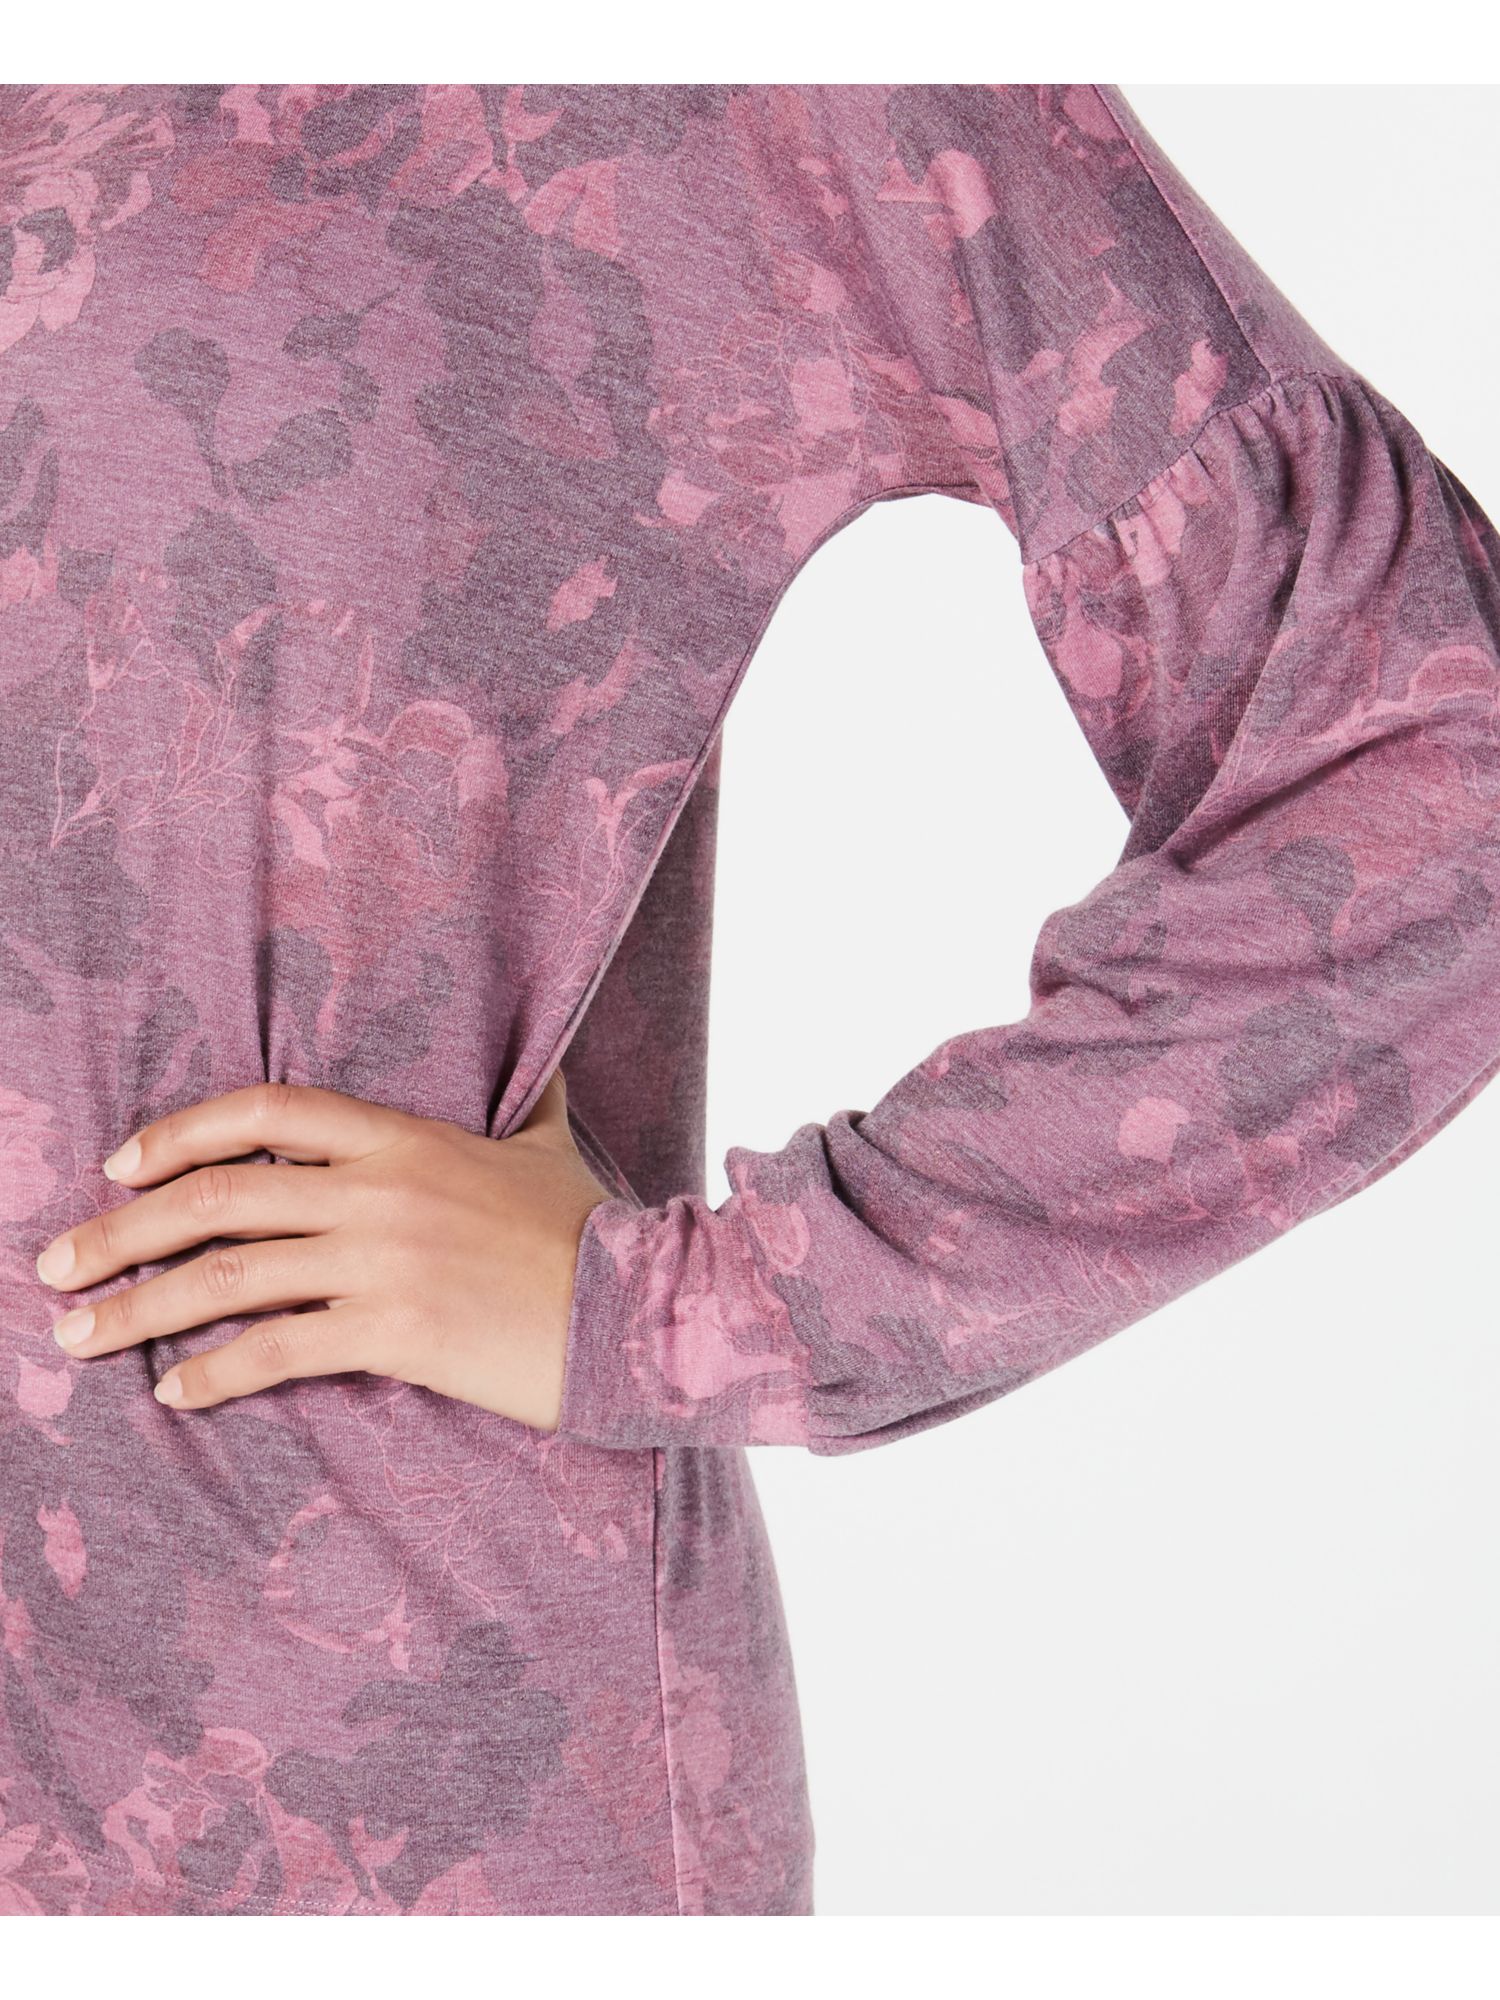 IDEOLOGY Womens Pink Floral Long Sleeve Jewel Neck Top XS - image 3 of 4